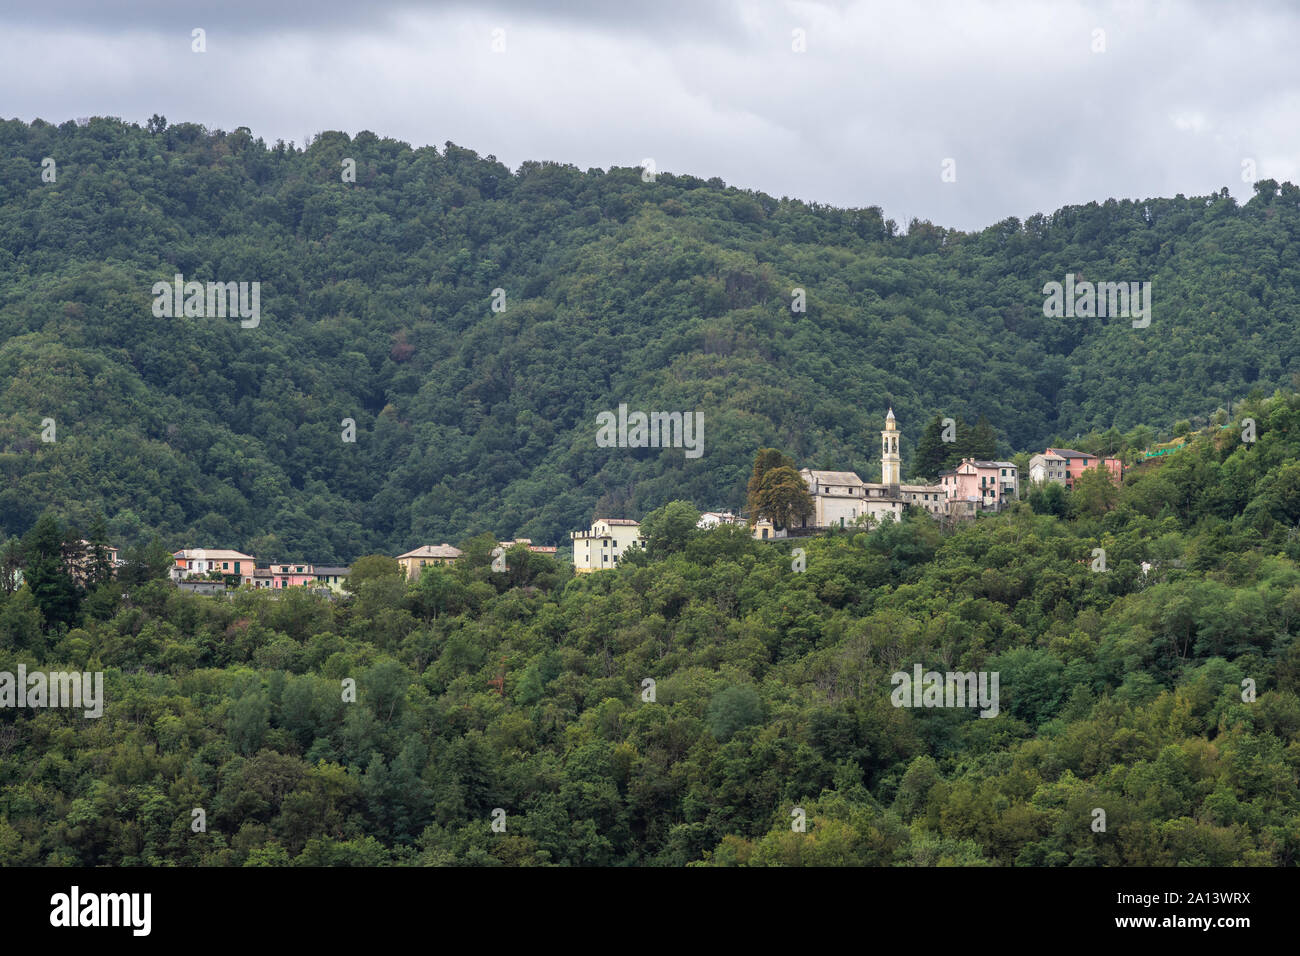 The village of Piandeipreti within the mountain range of the Apennines surrounded by abundant green dense forest, Liguria, Italy Stock Photo